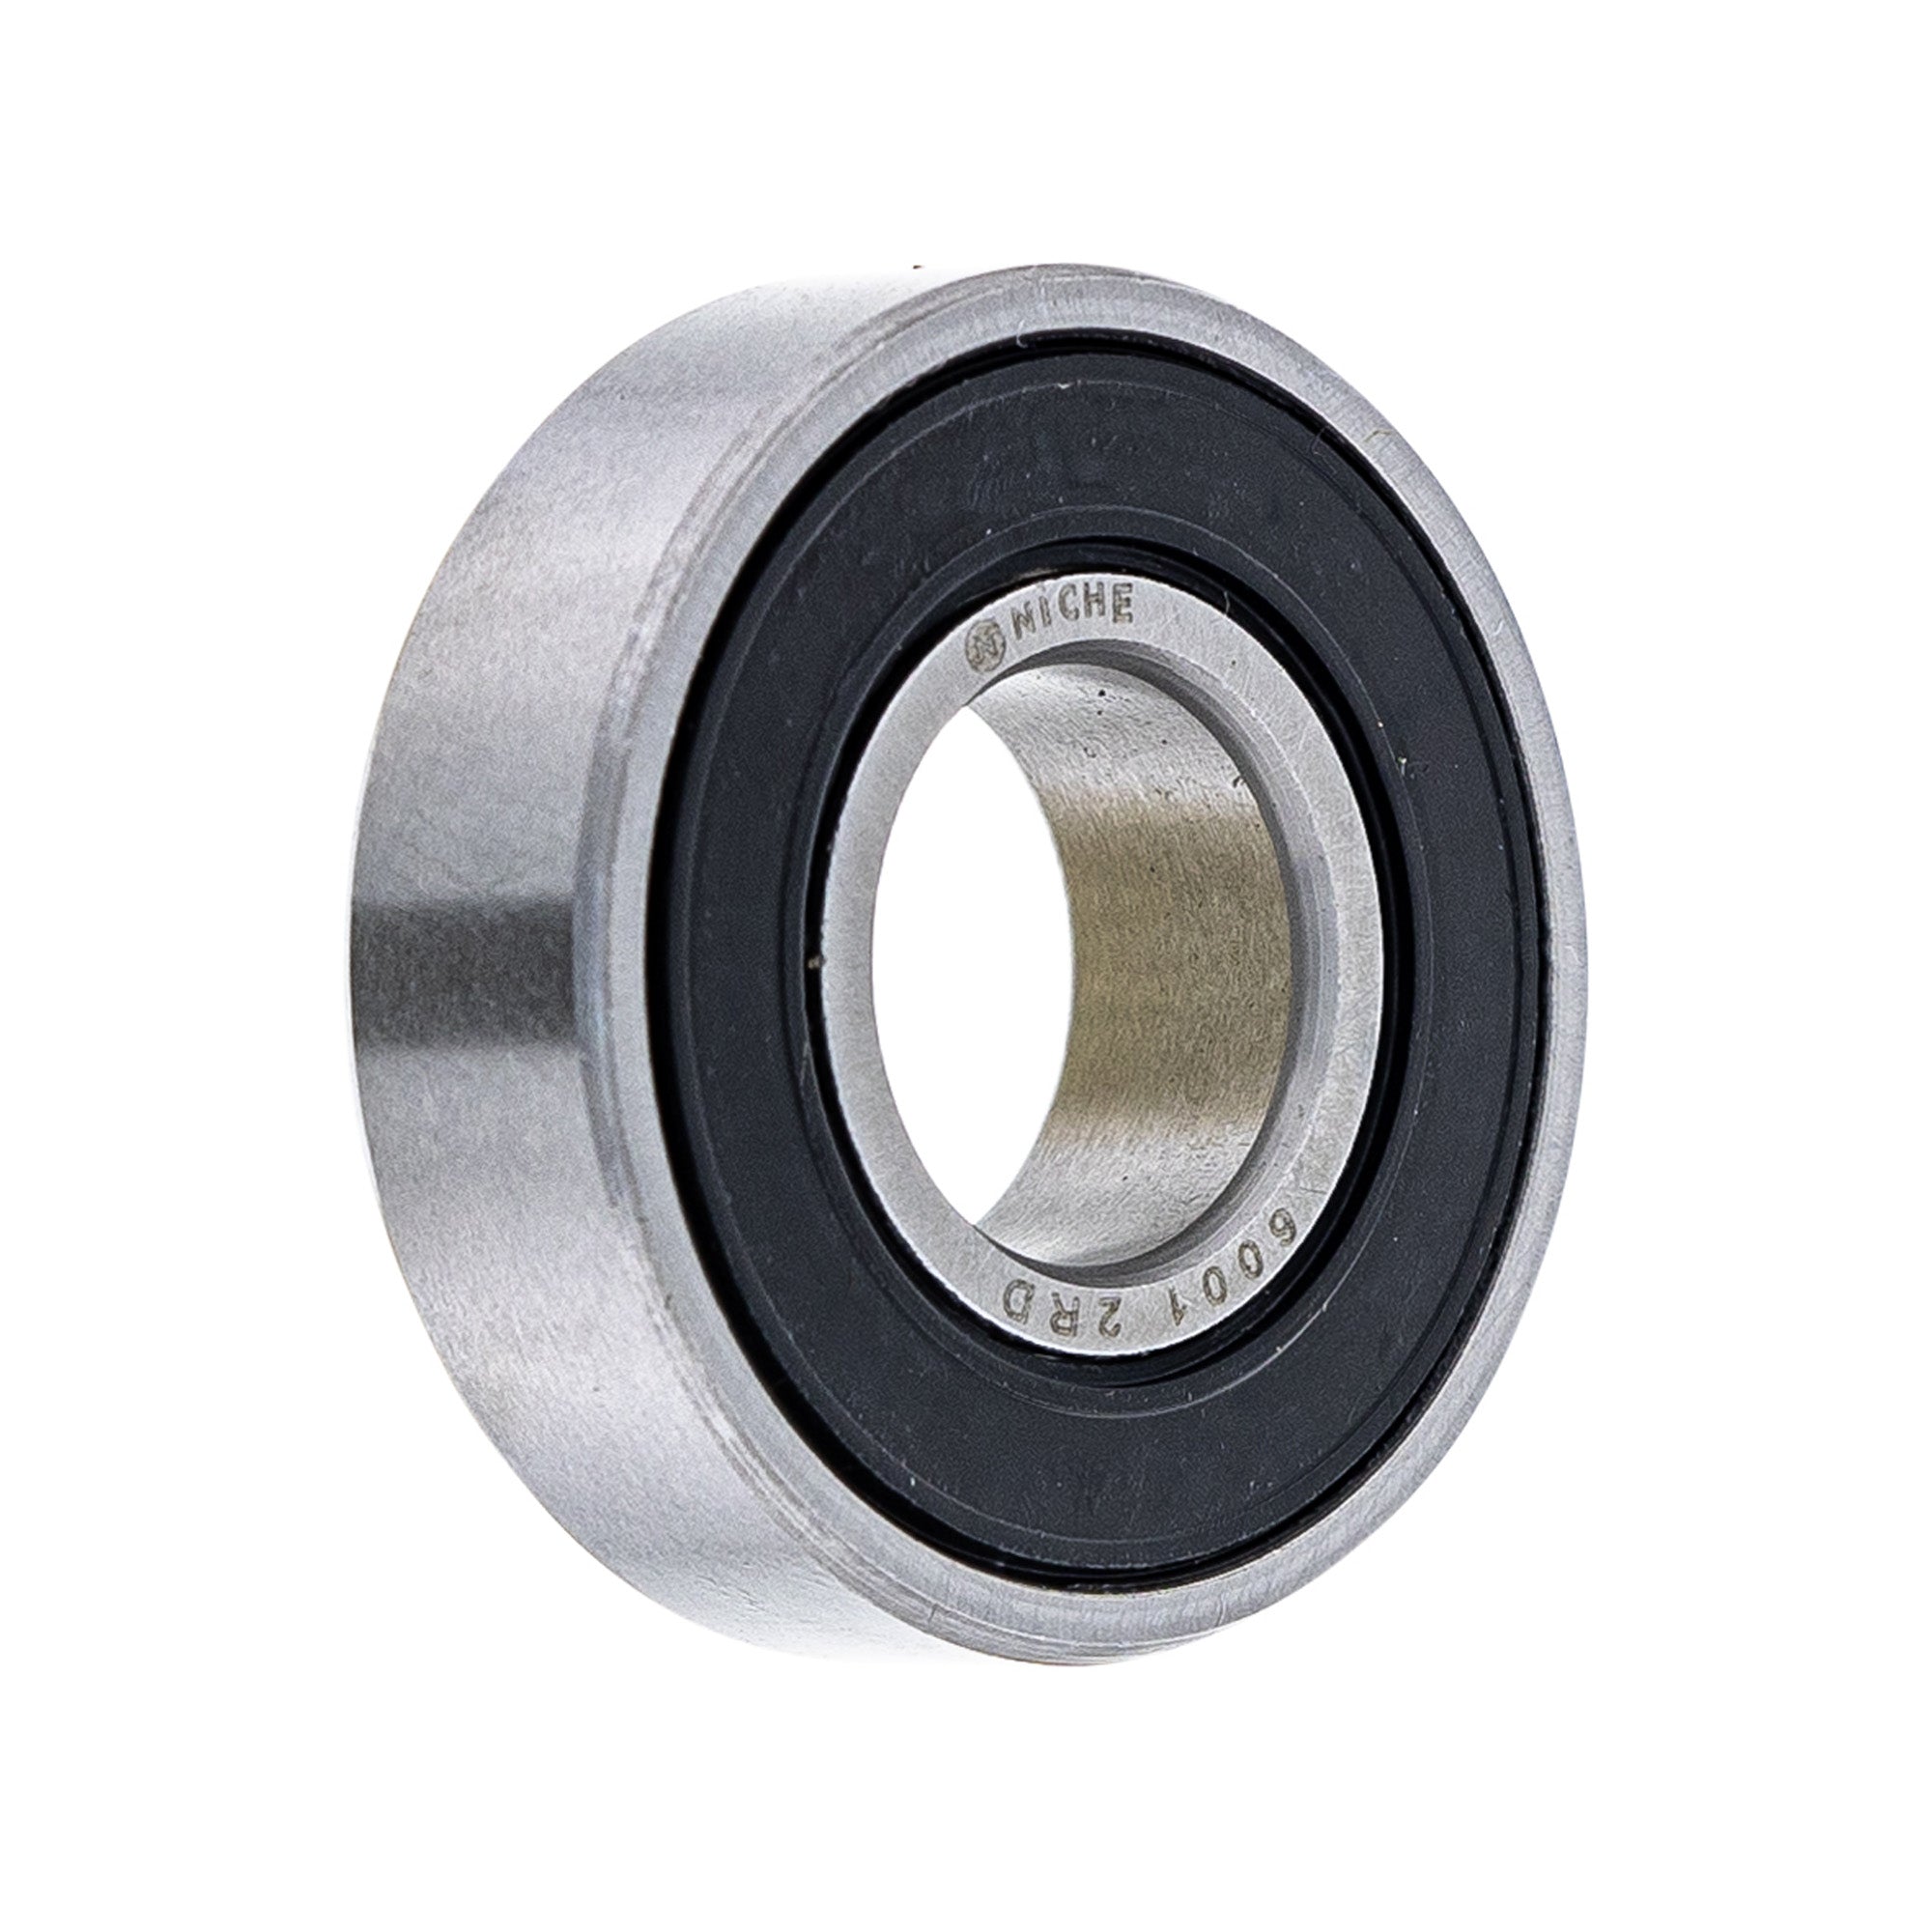 NICHE MK1008781 Wheel Bearing Seal Kit for zOTHER Ref No 50